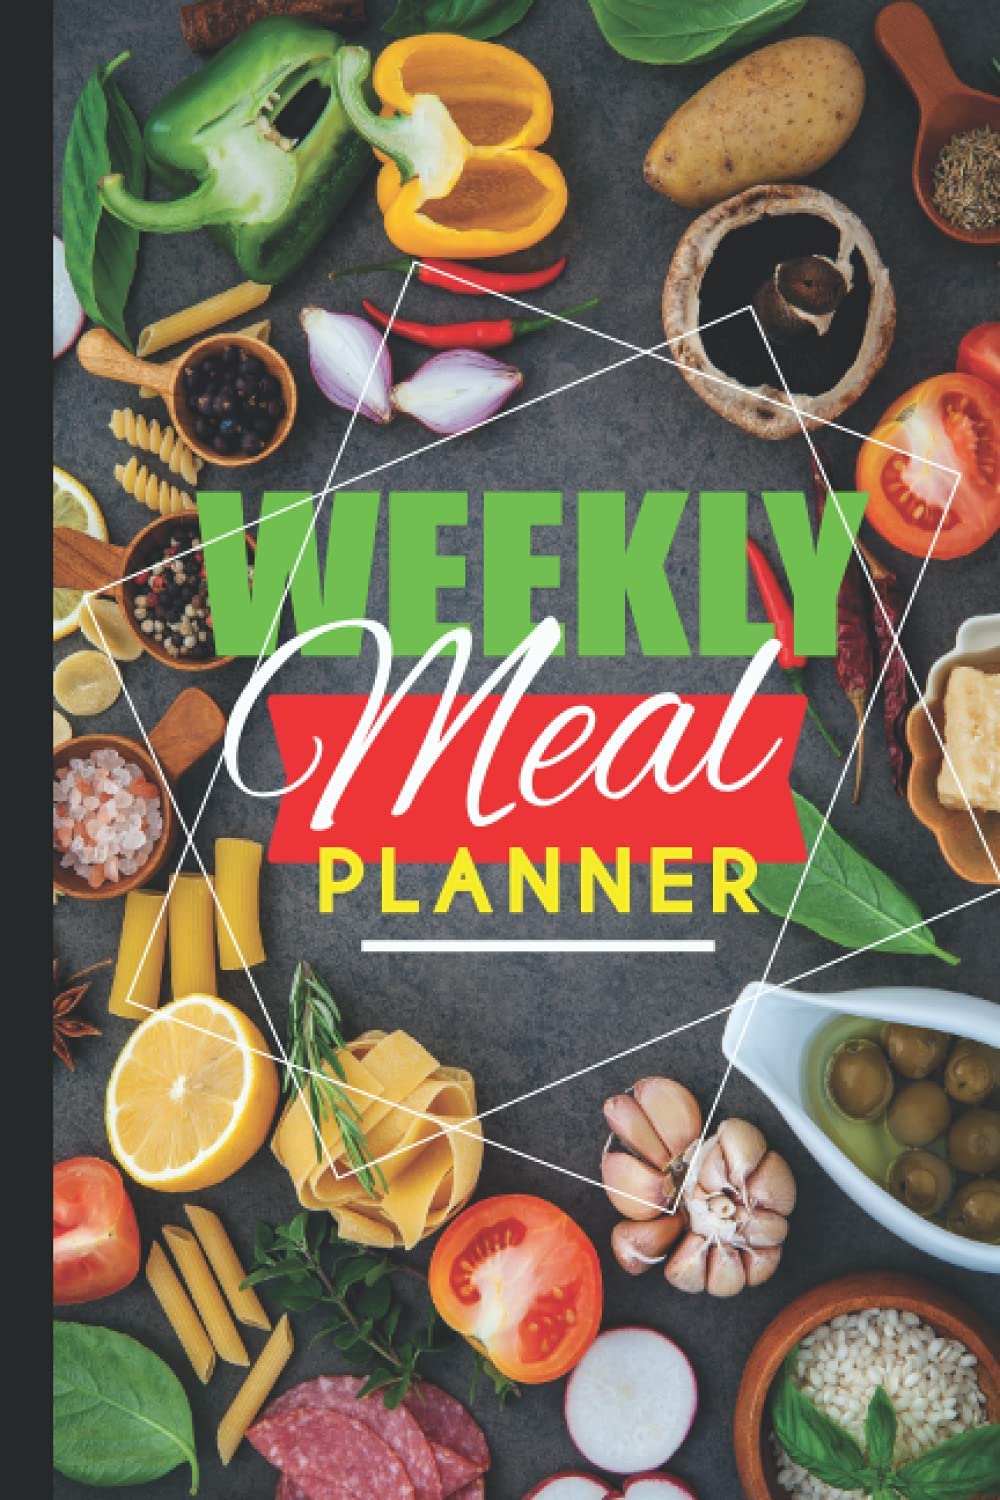 Weekly Meal Planner: Your Daily Food Prepper, Shopping & Grocery List Organizer, and Kitchen Assistant.